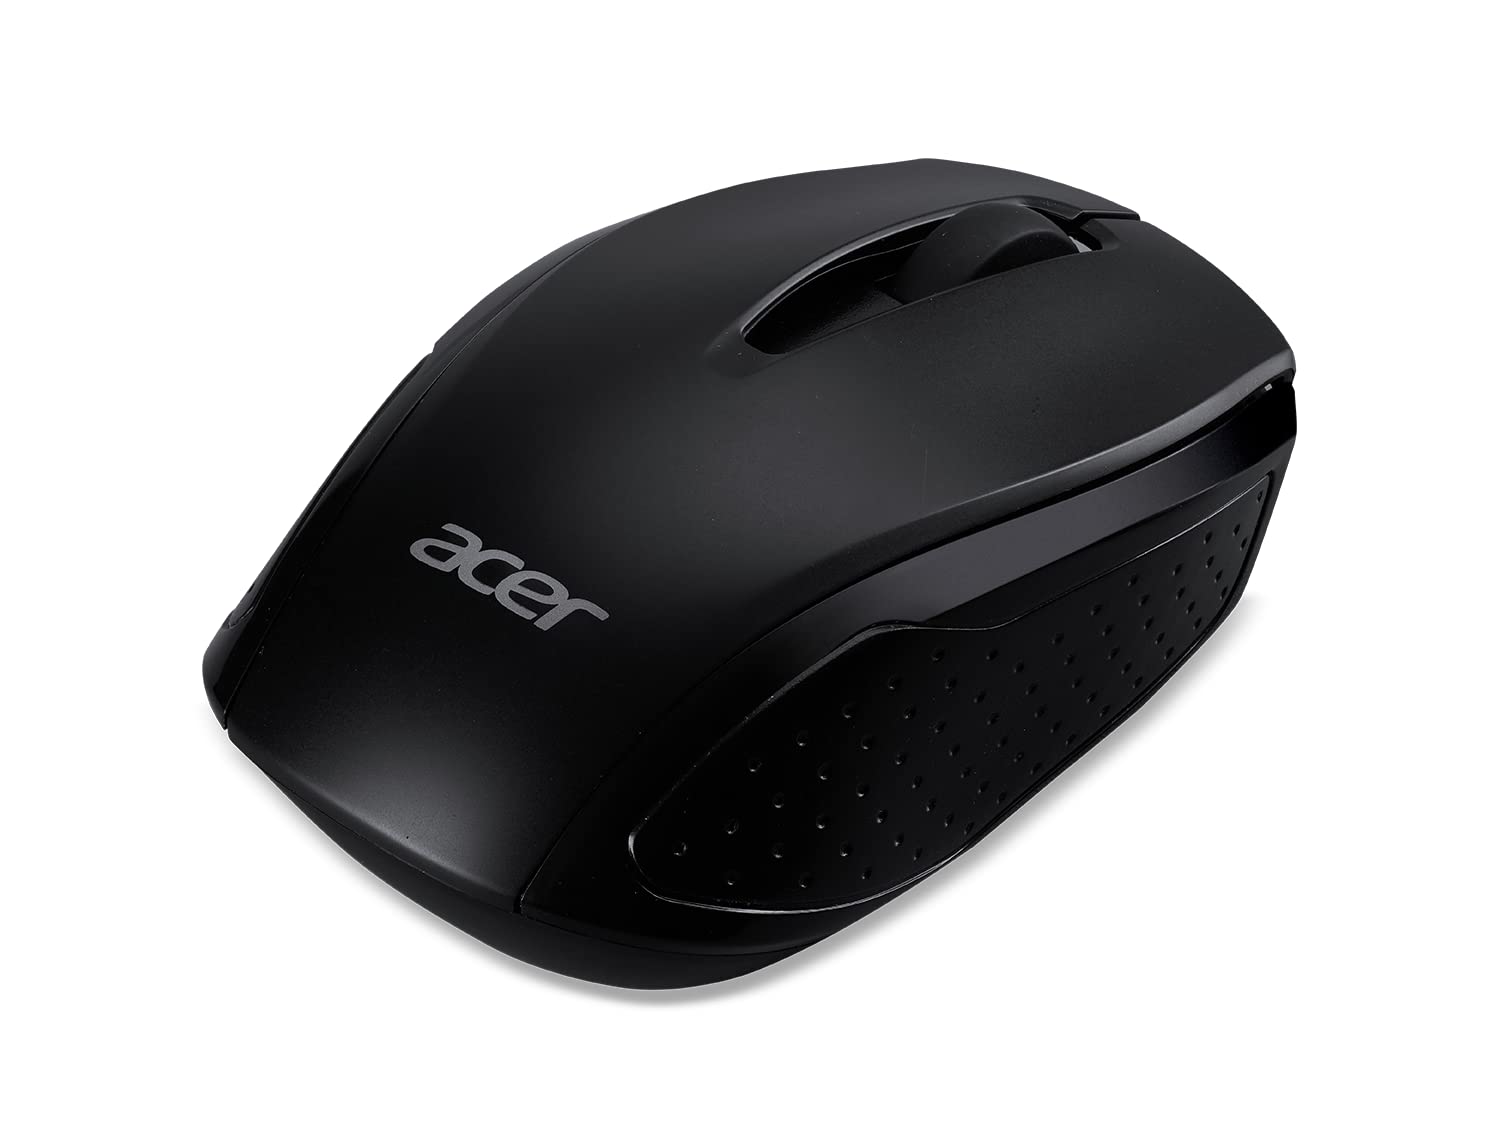 Acer Wireless Keyboard and Wireless Mouse Bundle | Fully Covered in a Silver Ion Antimicrobial* Body | Includes RF Wireless Optical Mouse, RF Wireless Keyboard and USB Receiver